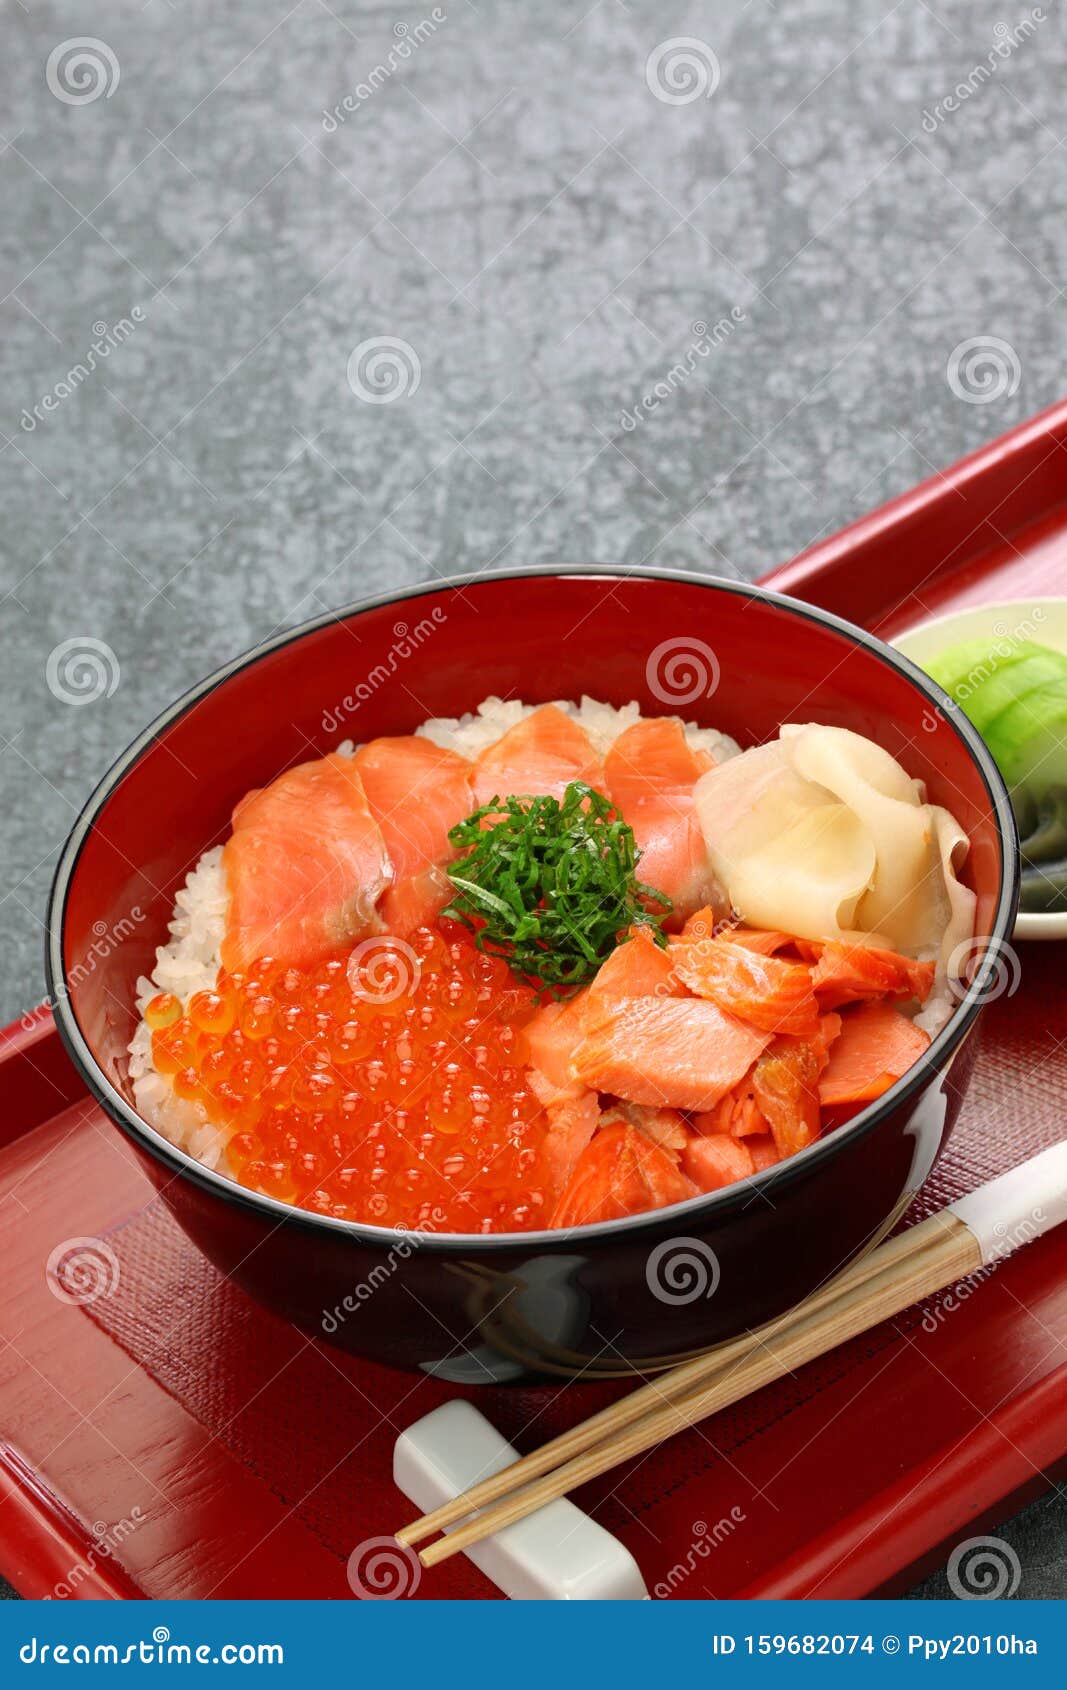 Japanese Rice Bowl Topped with Salmon & Salmon Roe Stock Photo - Image ...